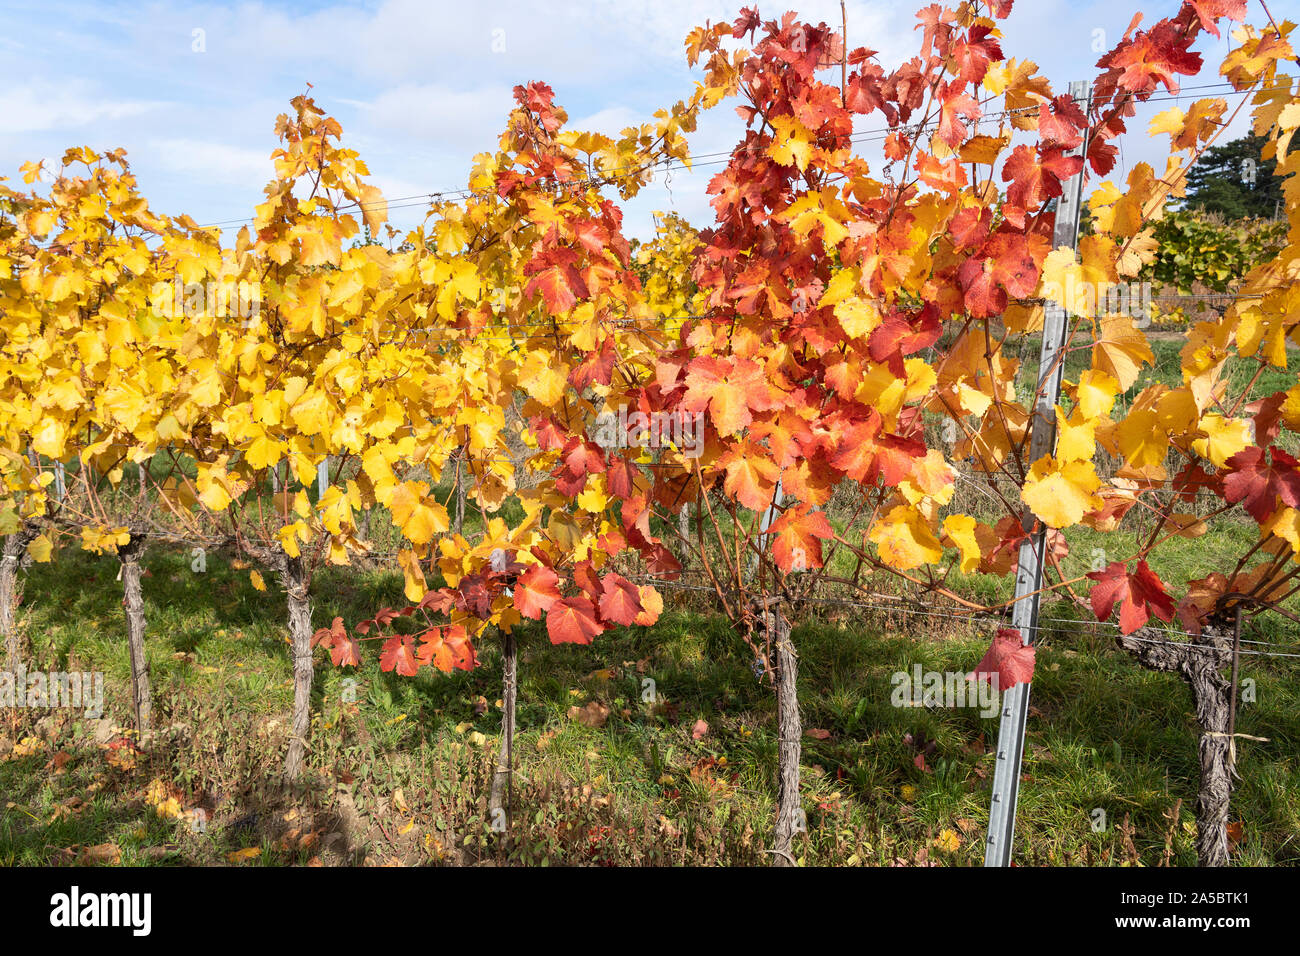 Rows of European grapevines with yellow and red leaves in autumn in a vineyard in the wine producing area of Kamptal, Lower Austria Stock Photo